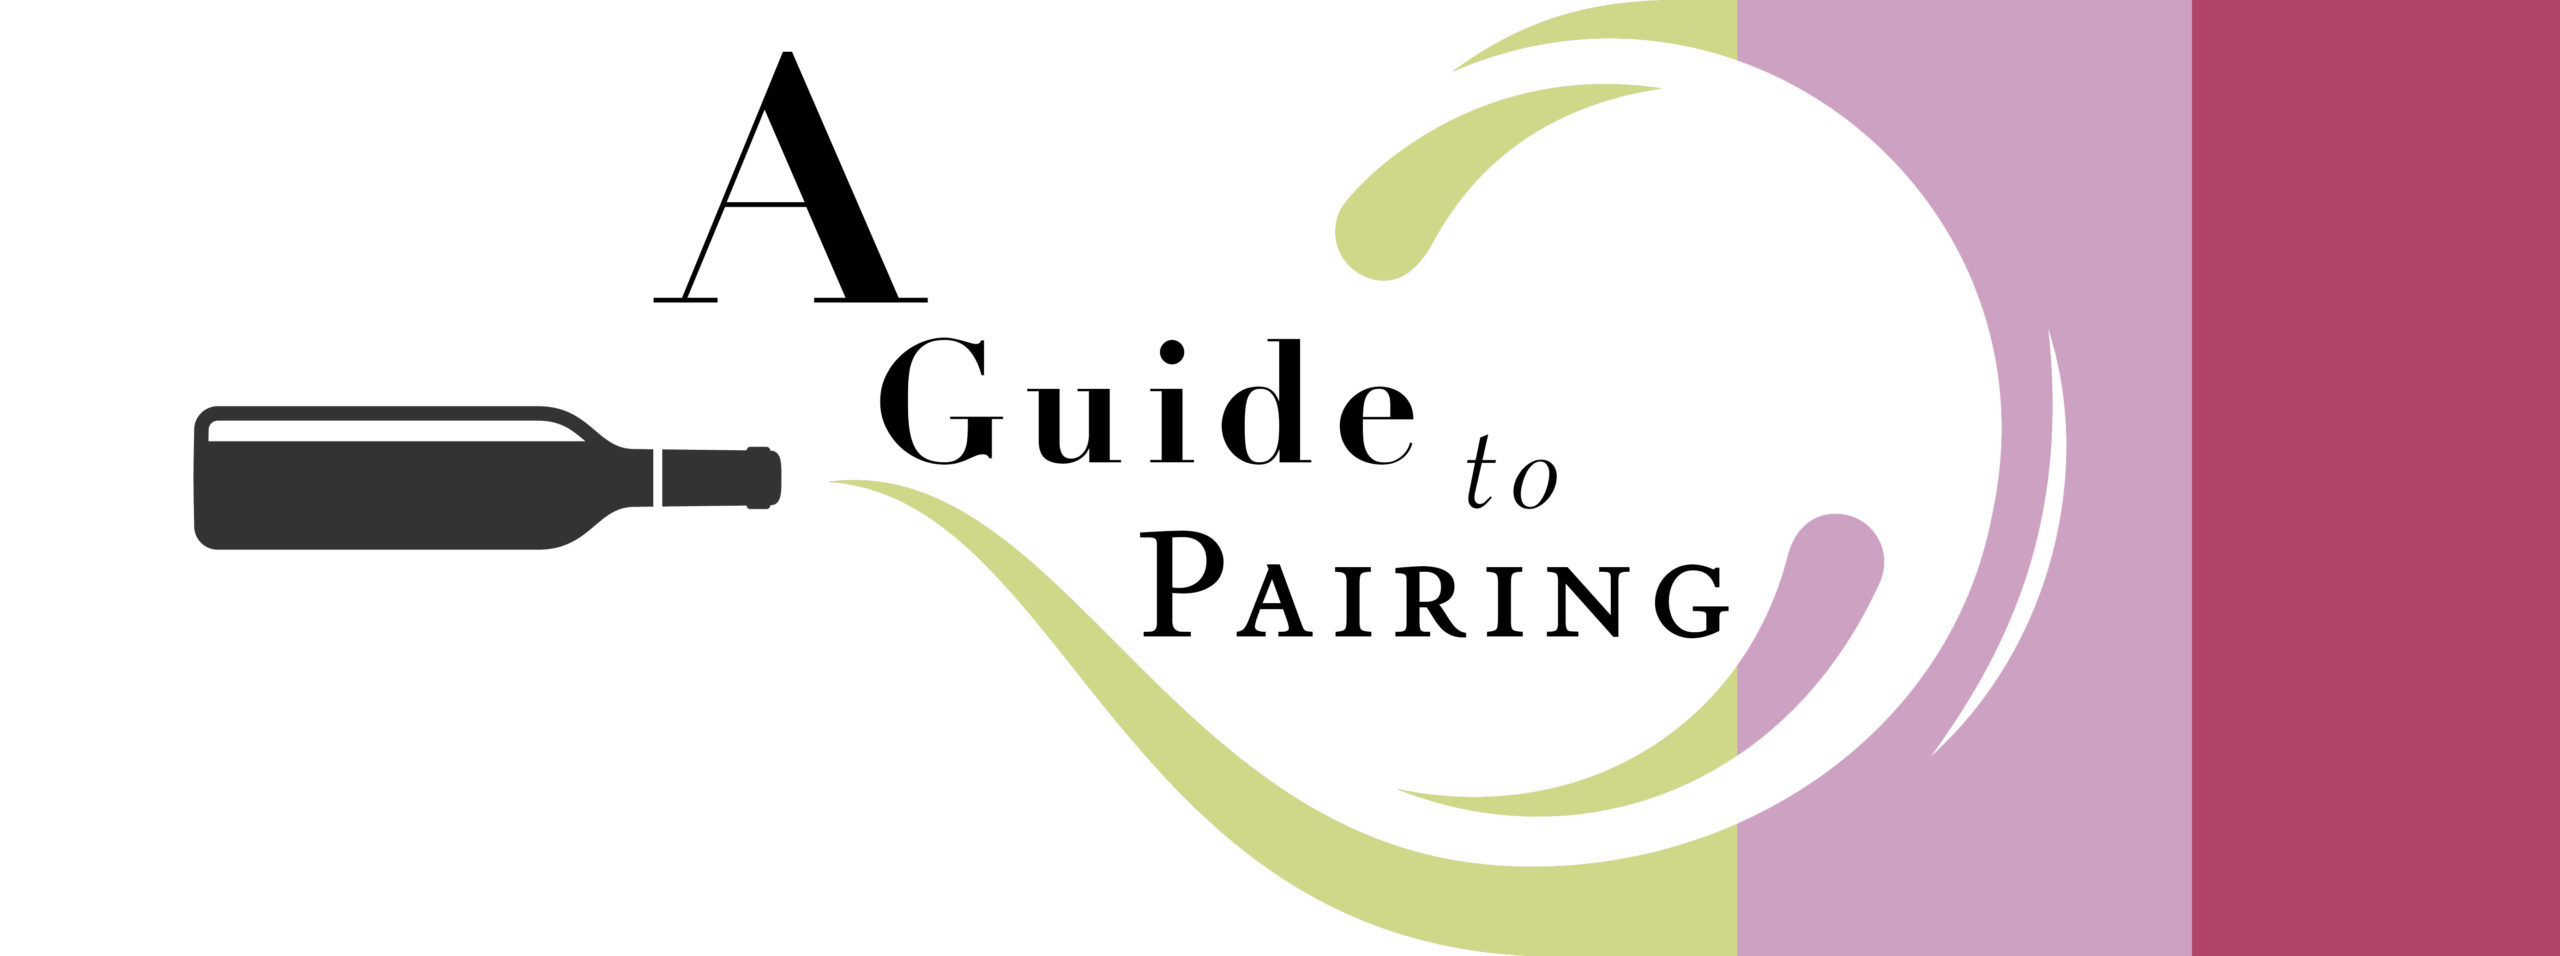 A Guide to Pairing graphic in multiple colors with a wine bottle